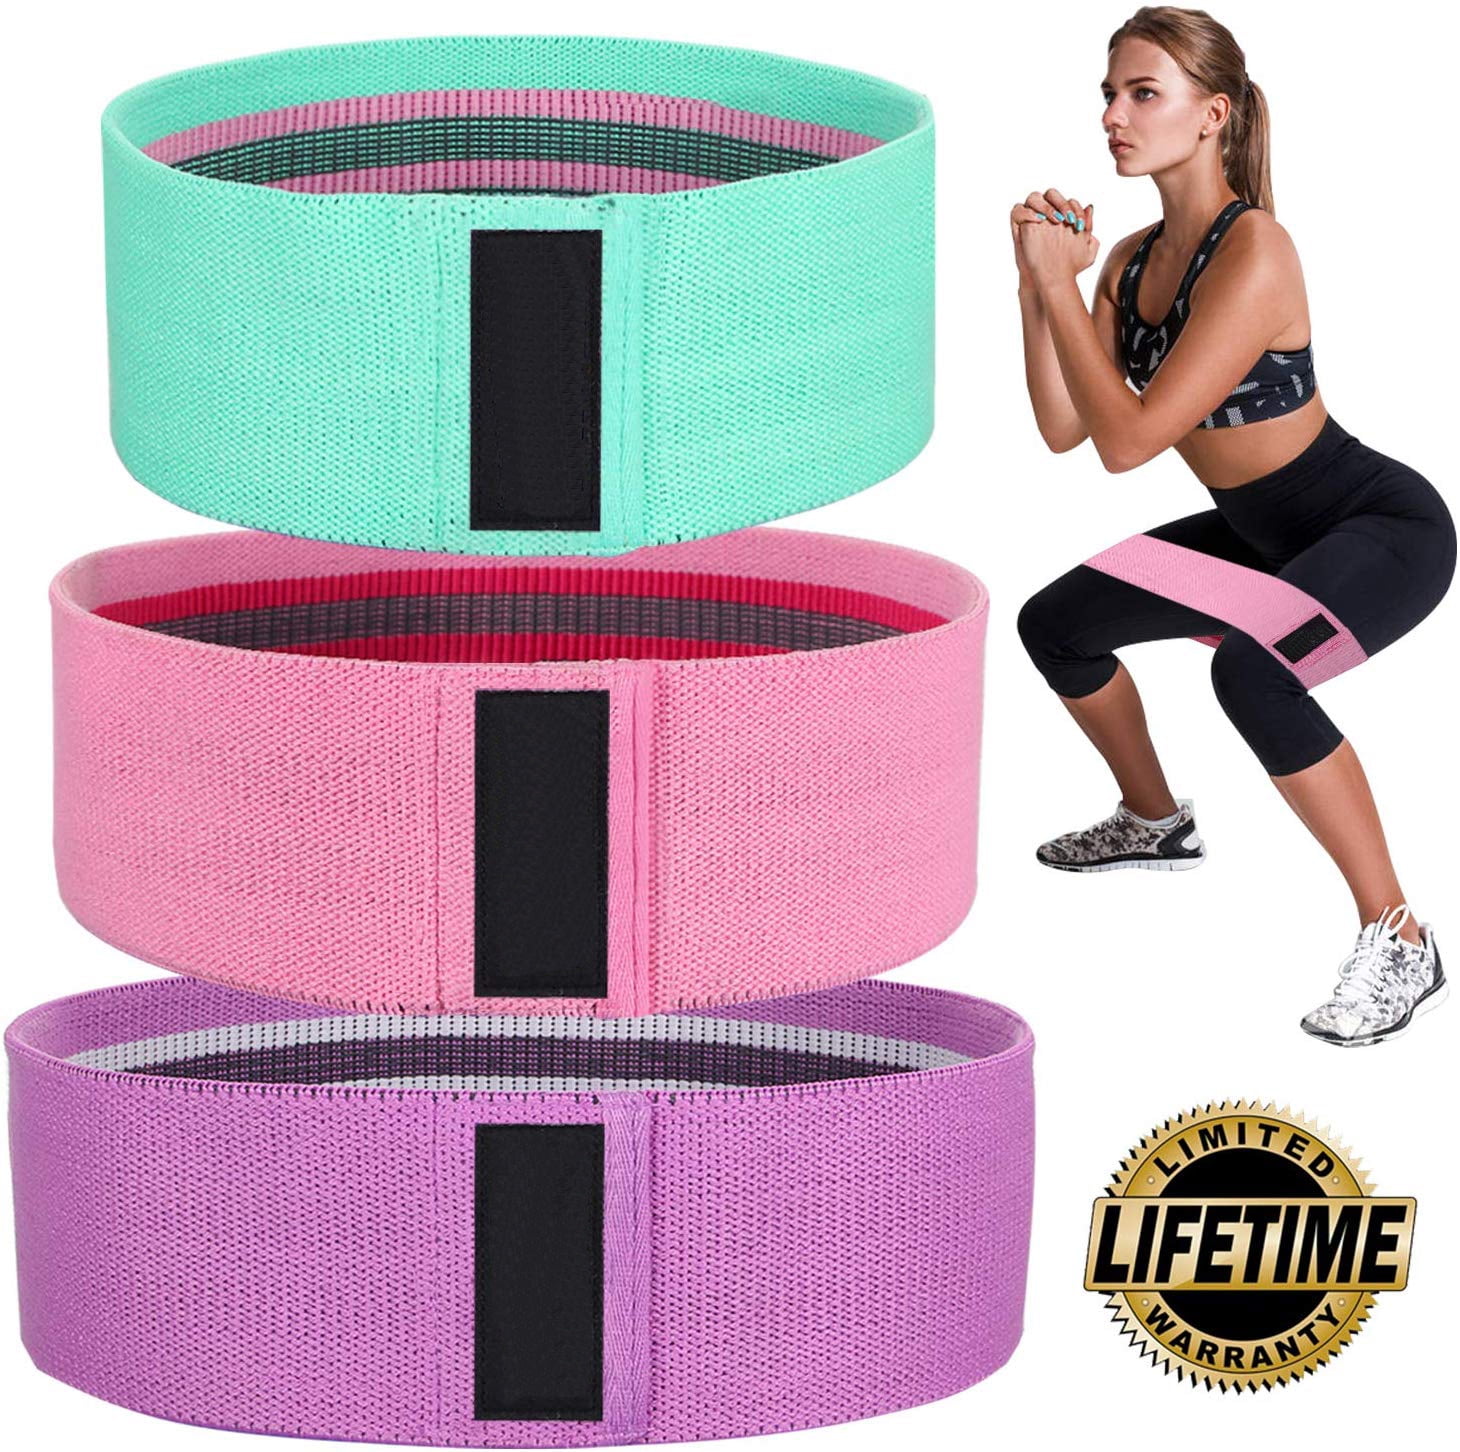 Fabric Resistance Bands Ladies Hip Shape Circle Glute Booty Band Squat Exercise 